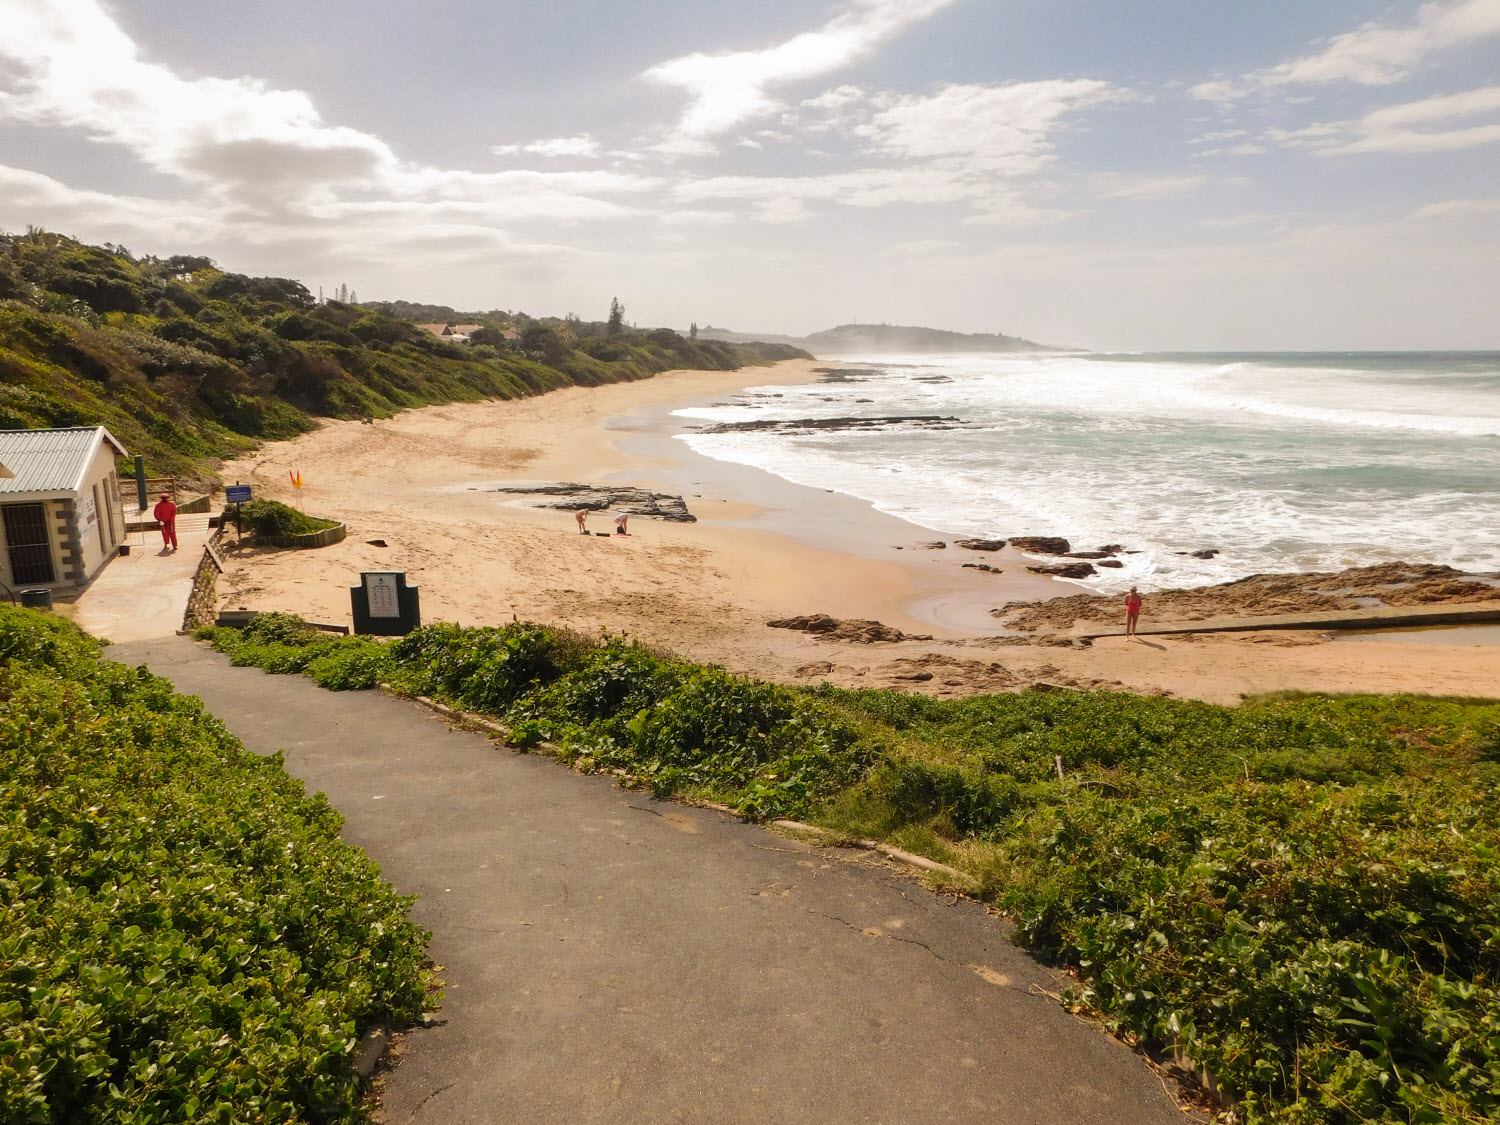 Security guards at Umzumbe Beach, KwaZulu-Natal captured from the top of the pathway leading down to the beach